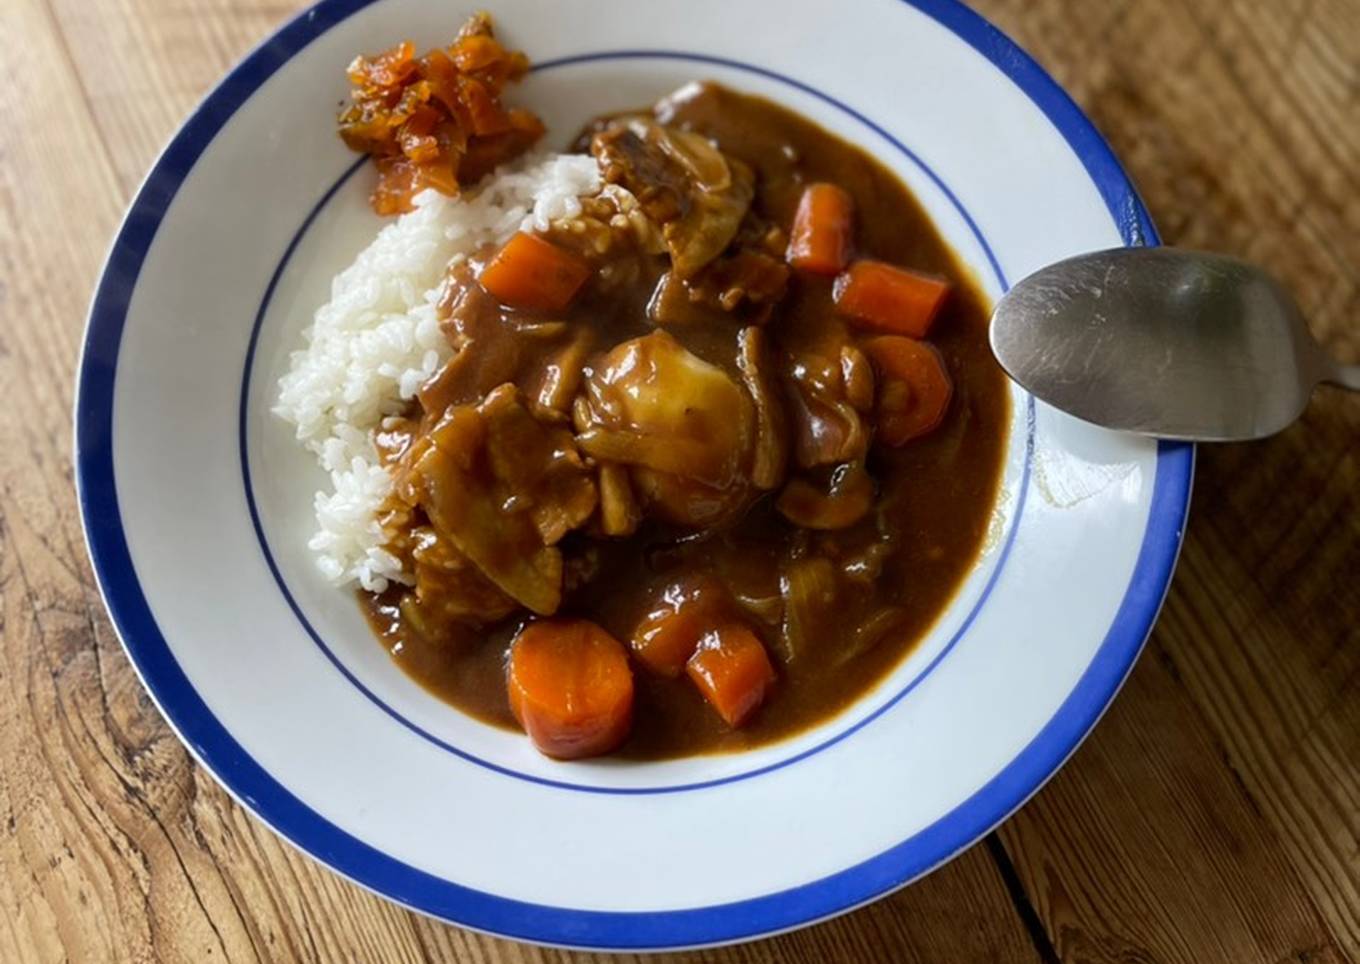 🍛 Japanese curry on rice